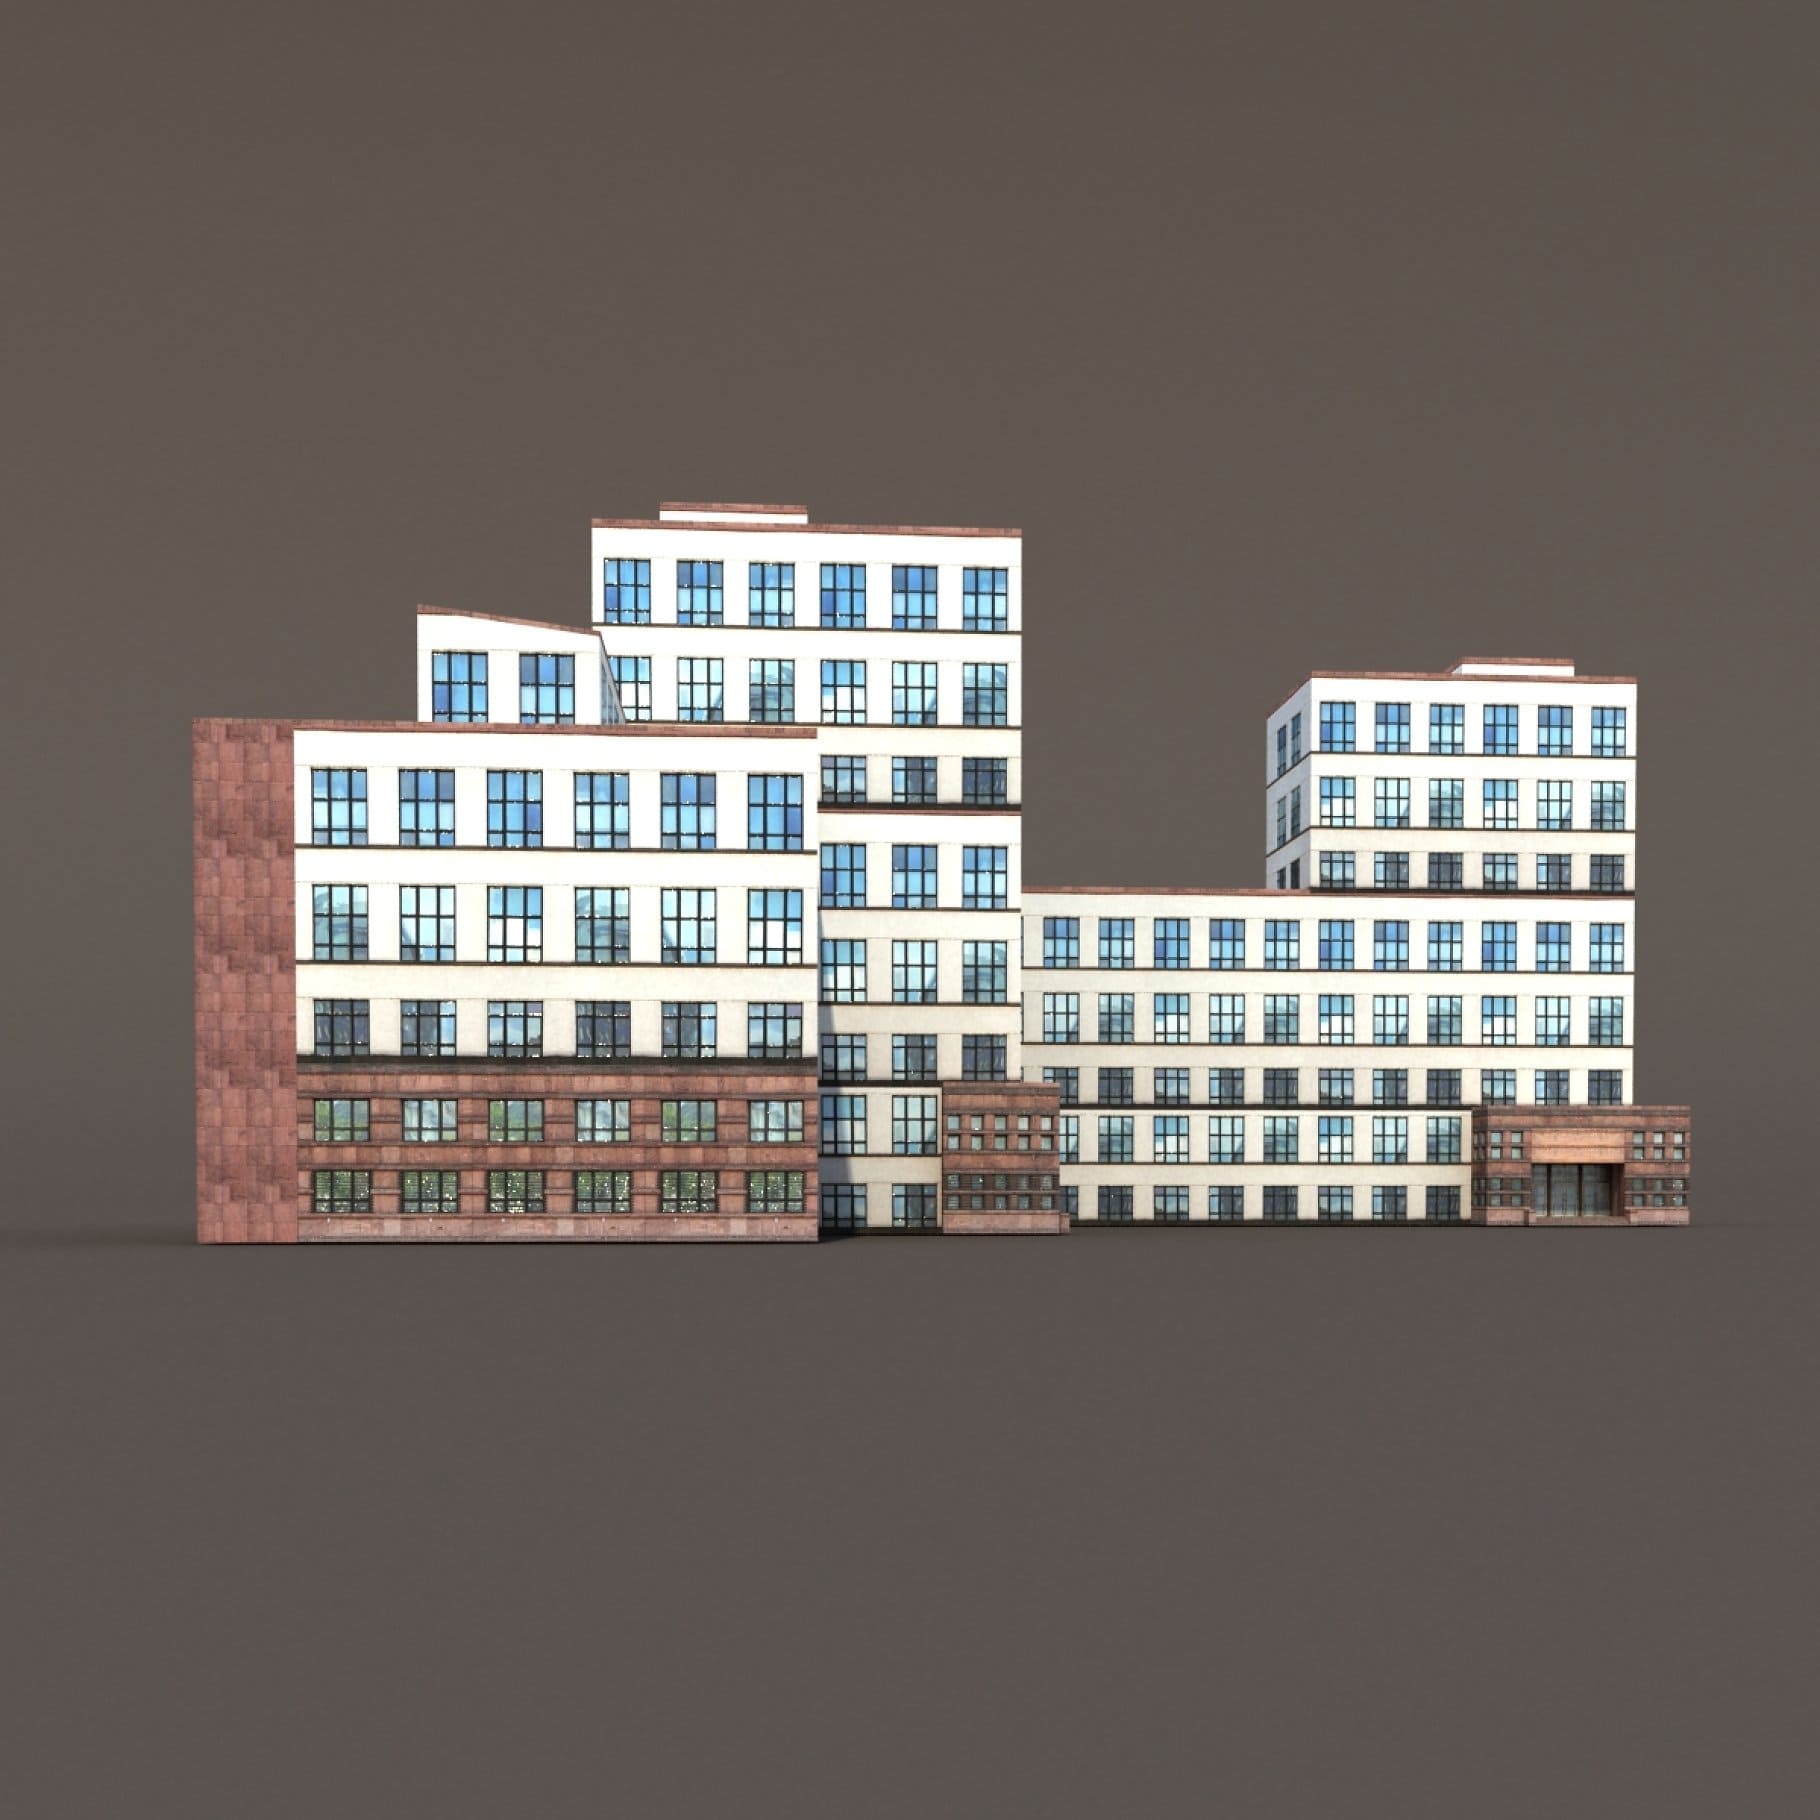 Office building with many additions.